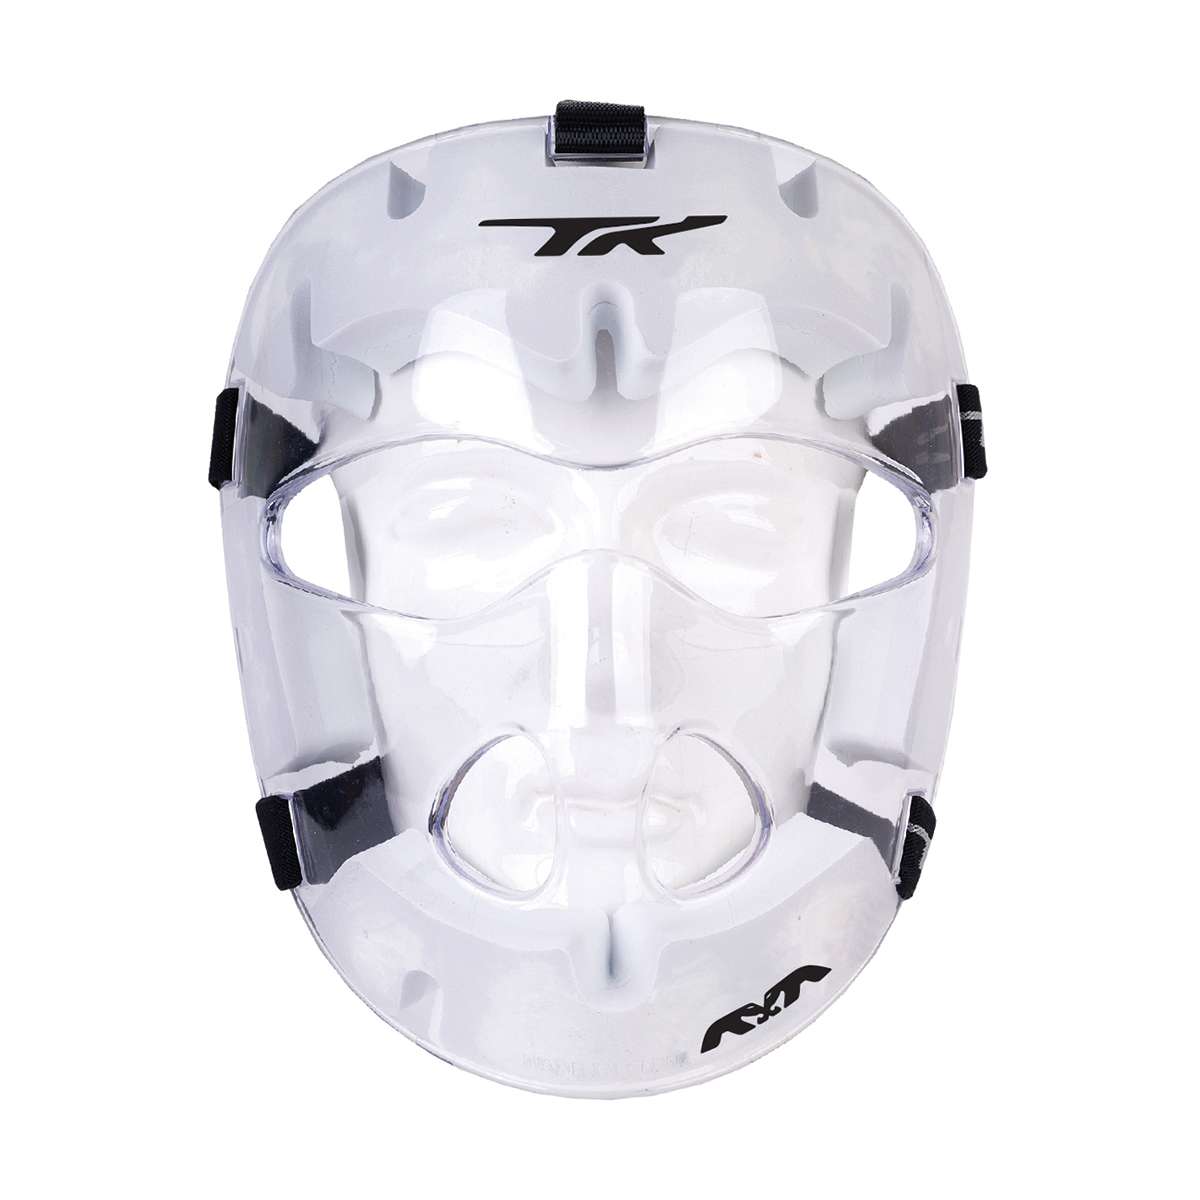 TK TOTAL TWO 2.1 PLAYER´S MASK